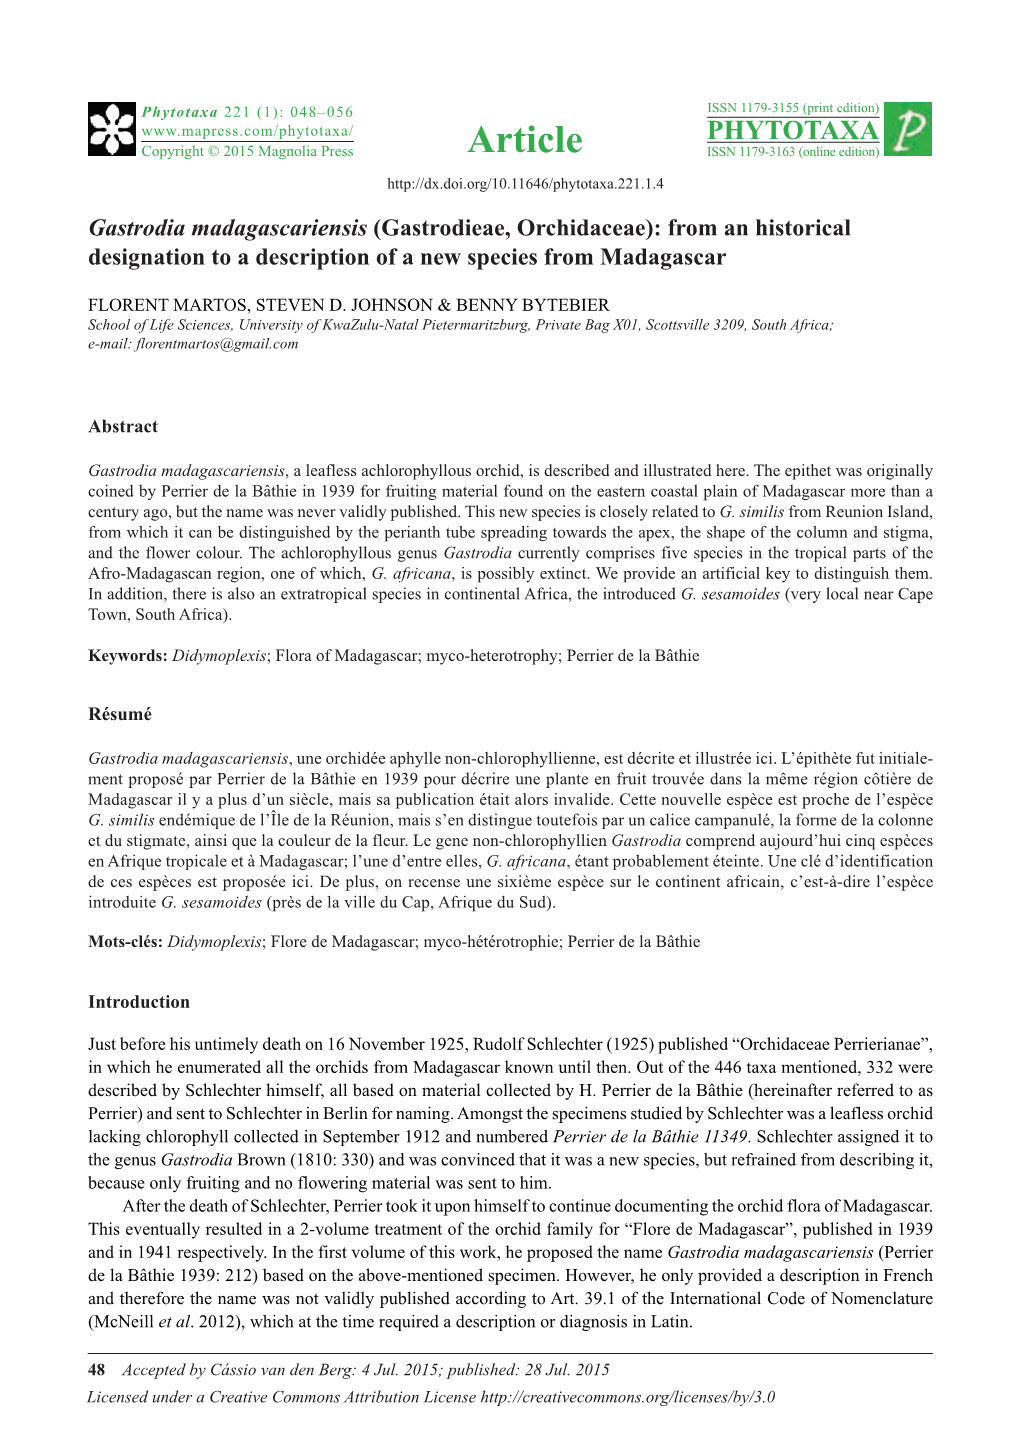 Gastrodia Madagascariensis (Gastrodieae, Orchidaceae): from an Historical Designation to a Description of a New Species from Madagascar